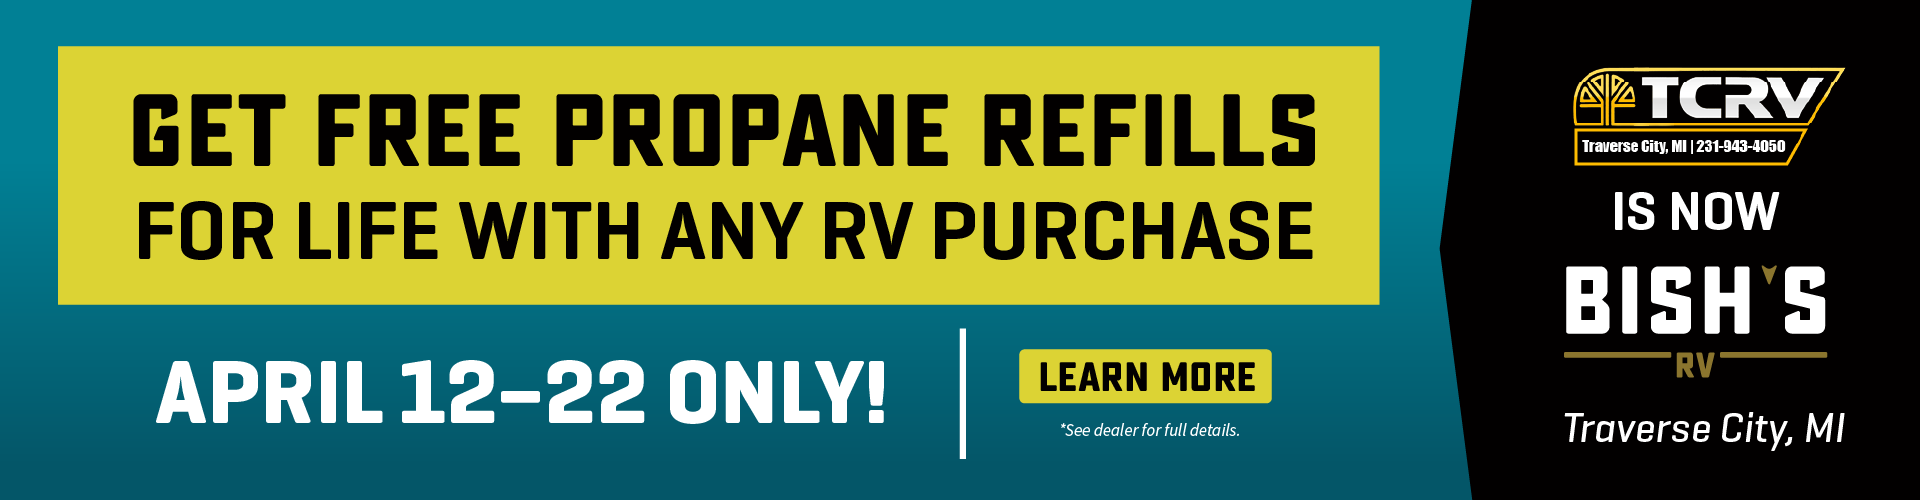 Purchase any RV from April 12-22, 2023 and receive free propane refills for life - see dealer for details